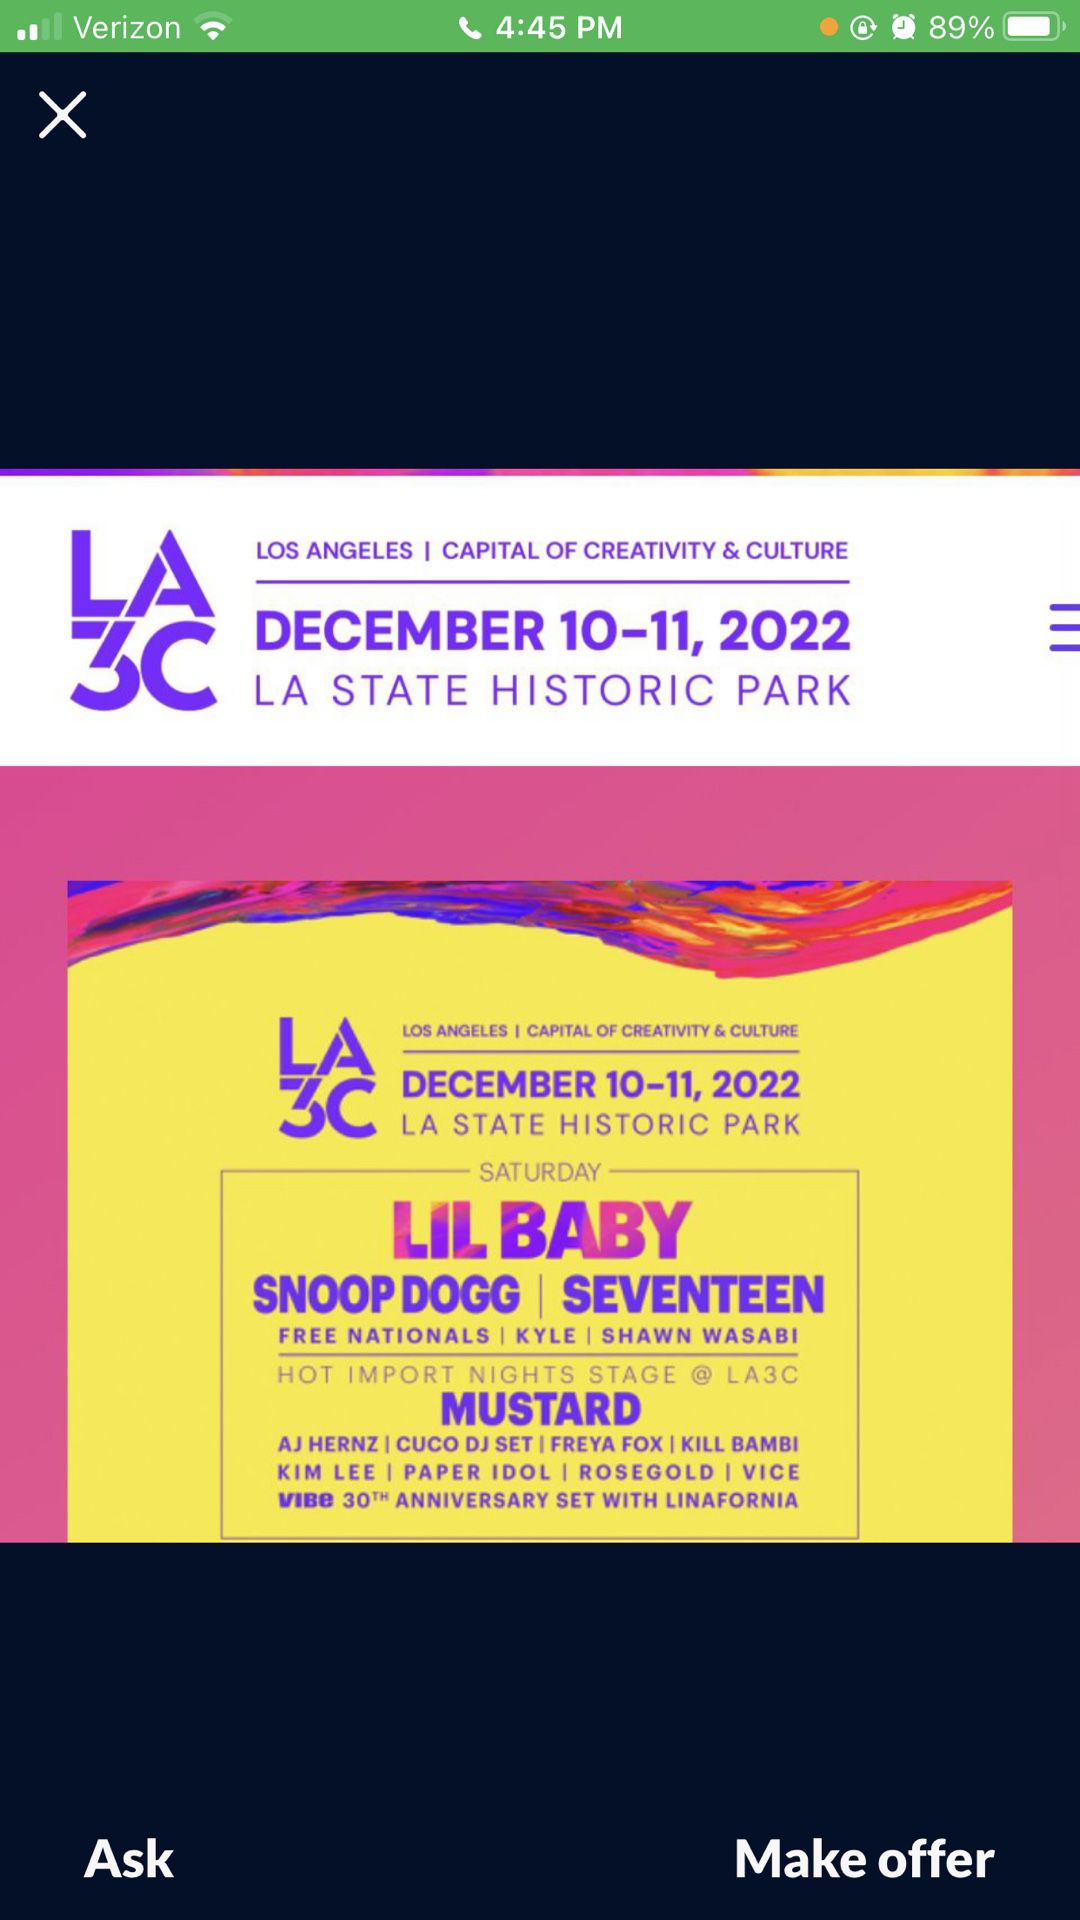 LA3C 2 DAY PASSES 🎤🍺🍻🥂🍹(2) TICKETS 🎫 🎫 $100 EACH $200 FOR PAIR 🔥🔥